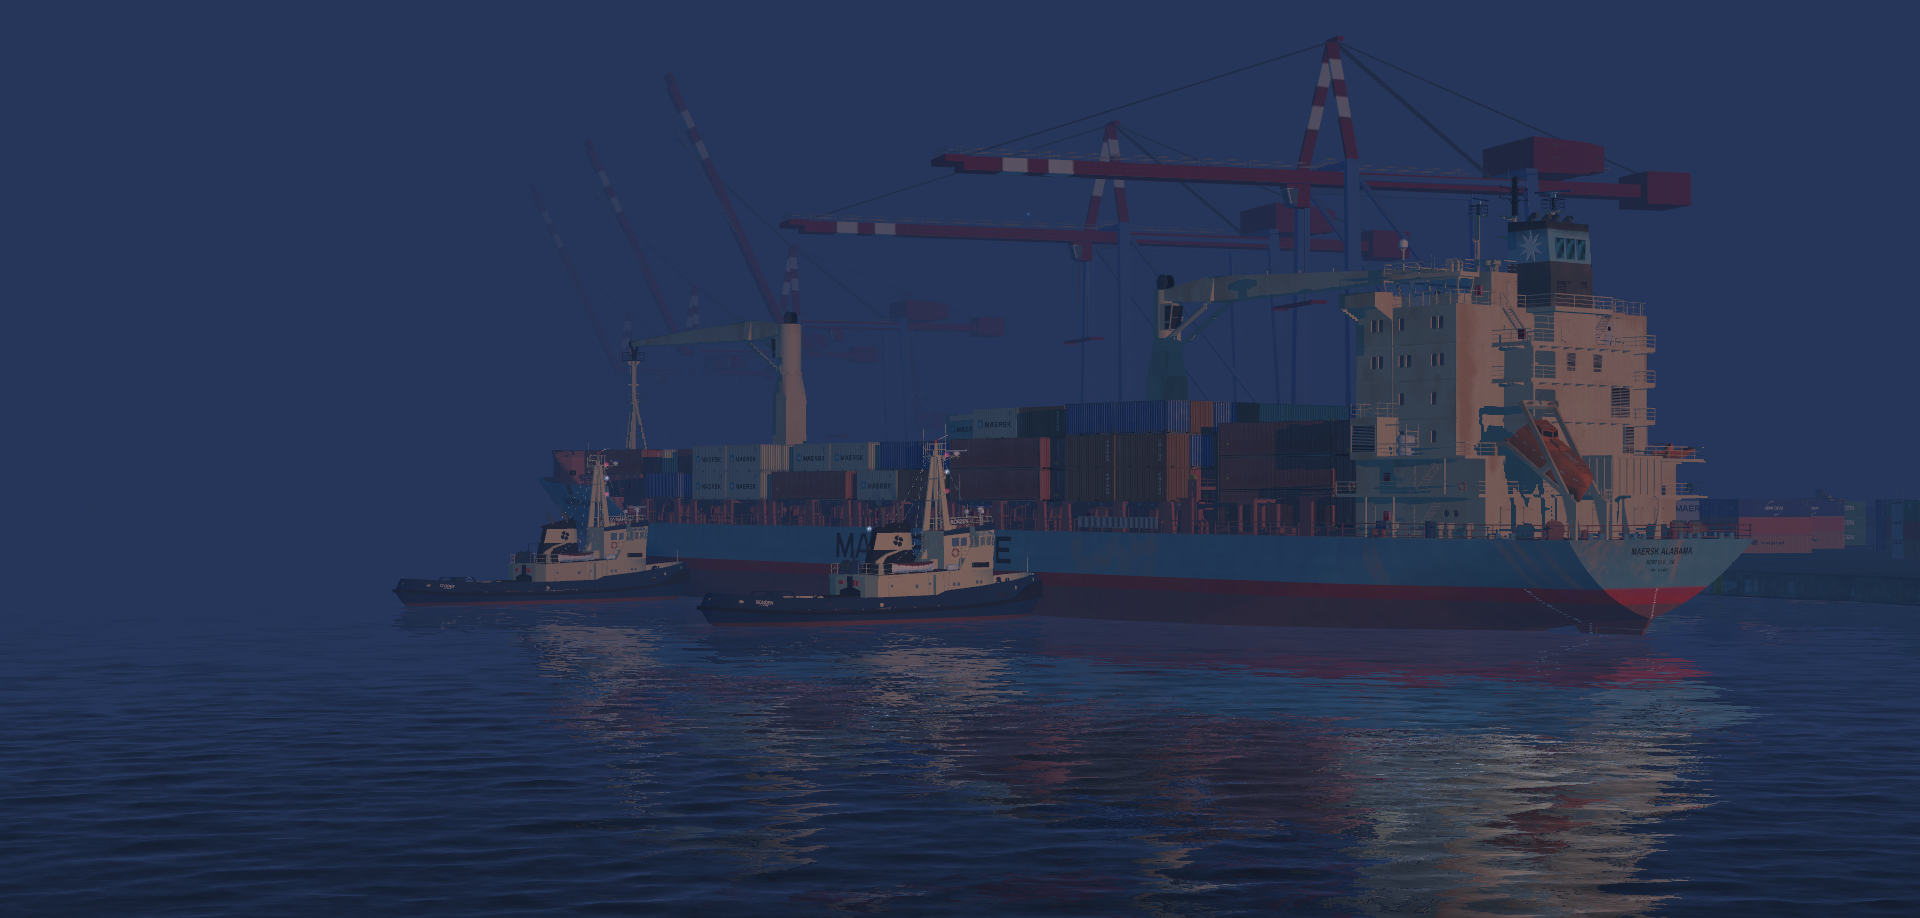 Maersk Alabama now available